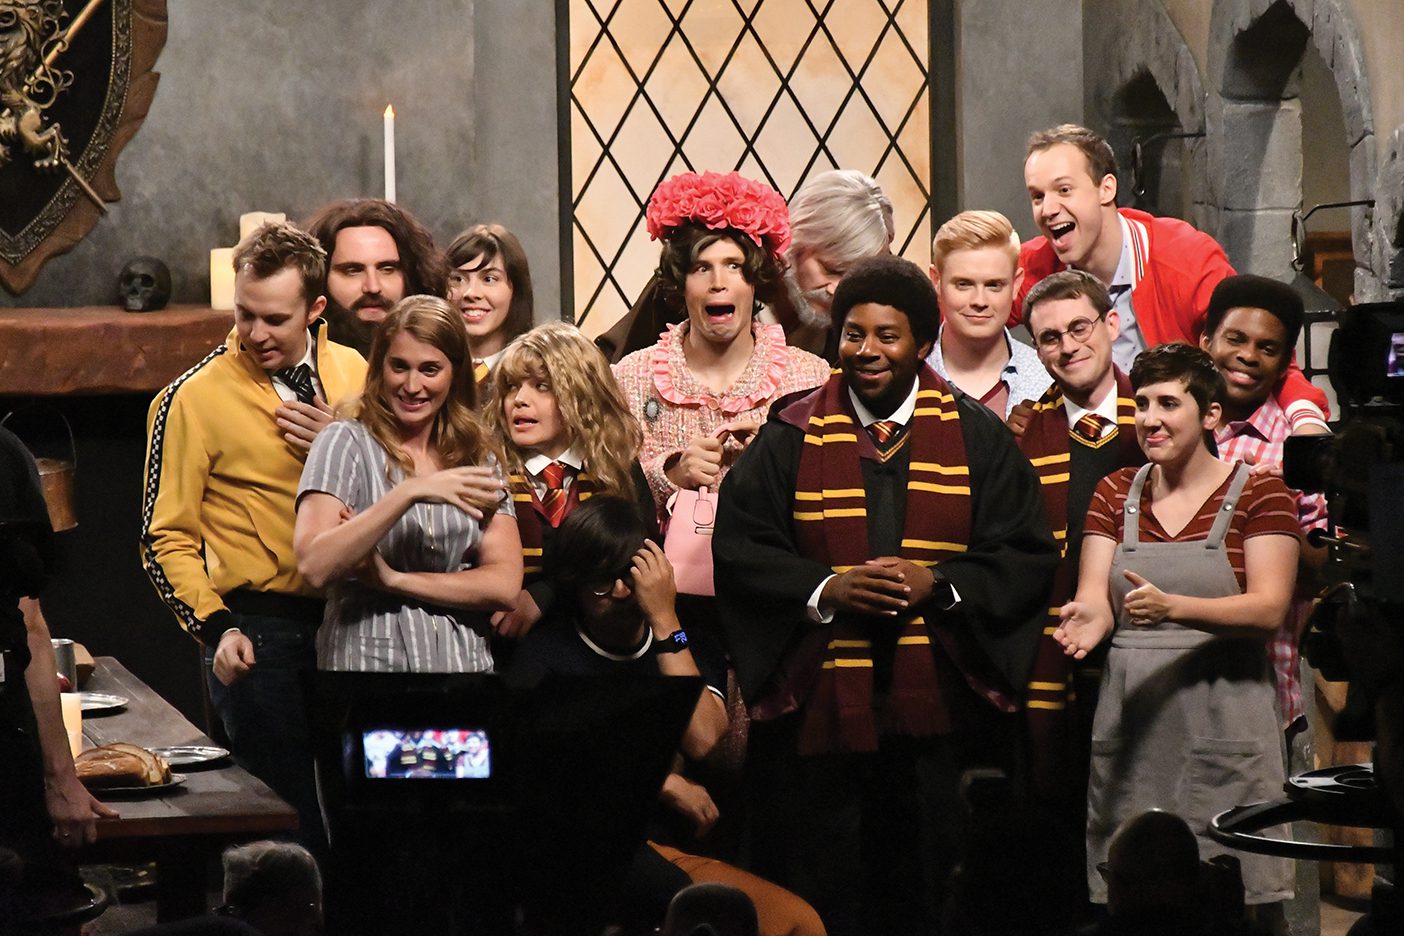 The original ten members of the Studio C cast are grouped together in a candid photo with Kenan Thompson.